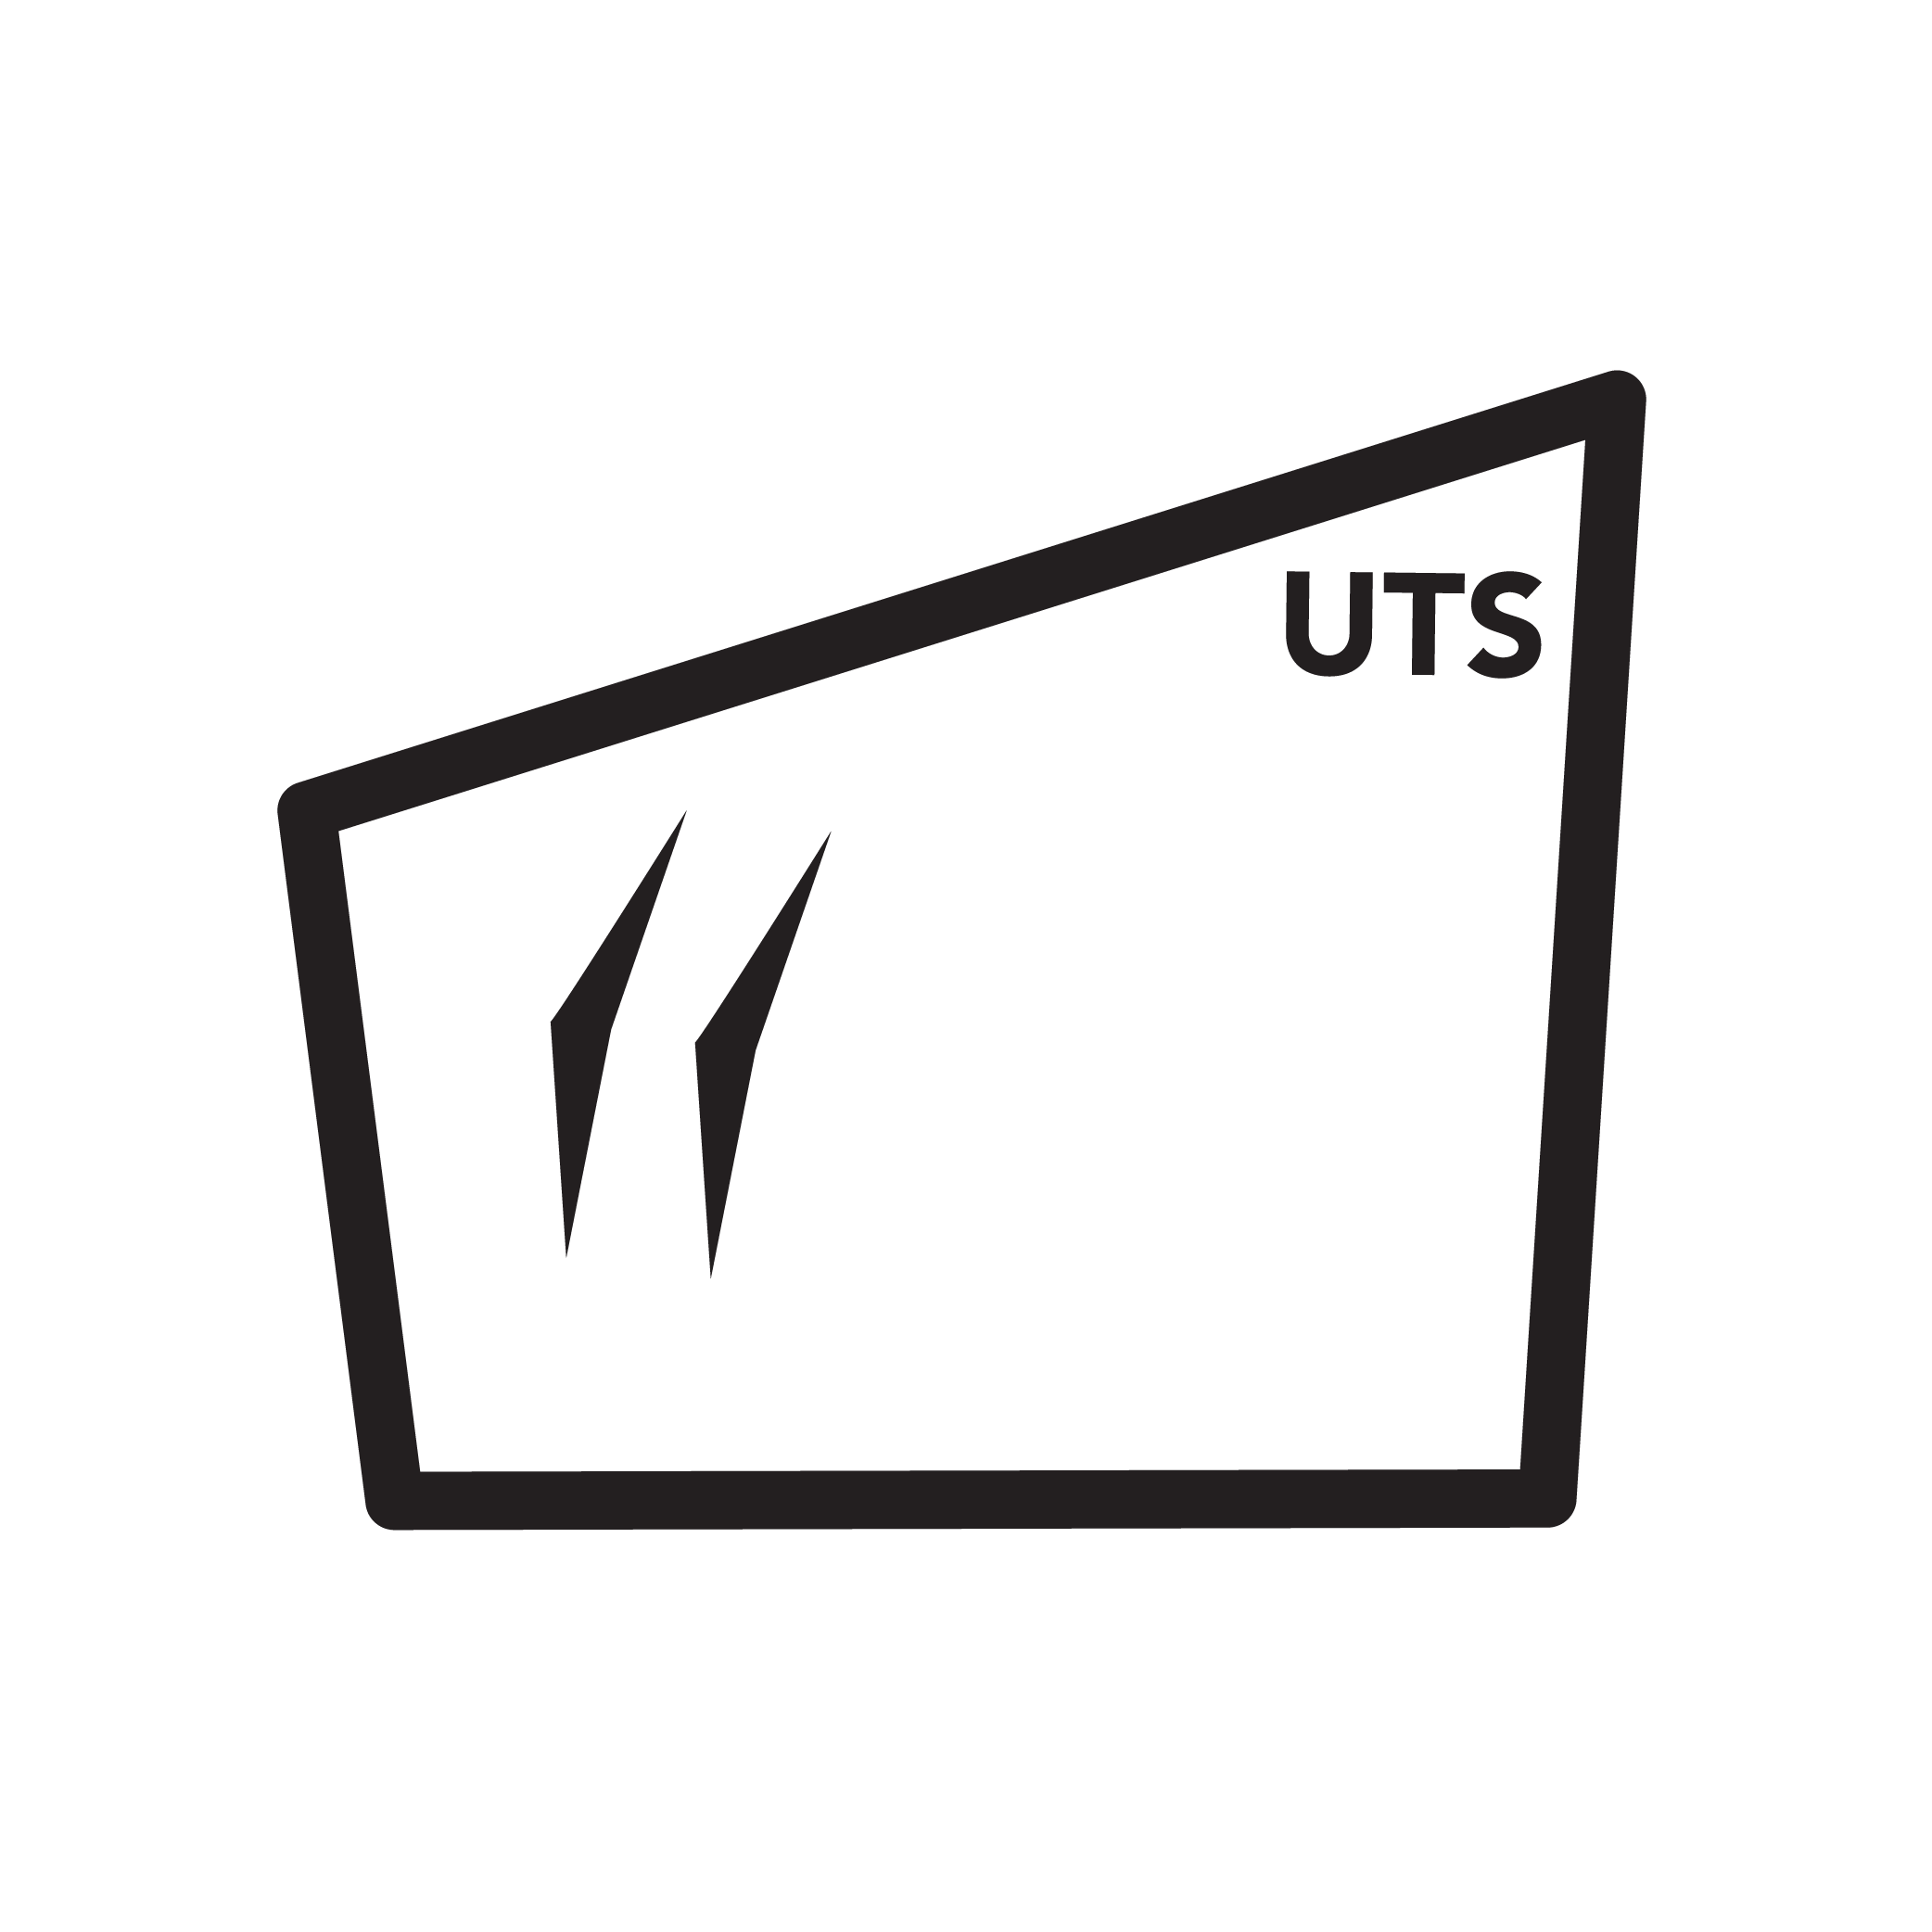 Part of UTS